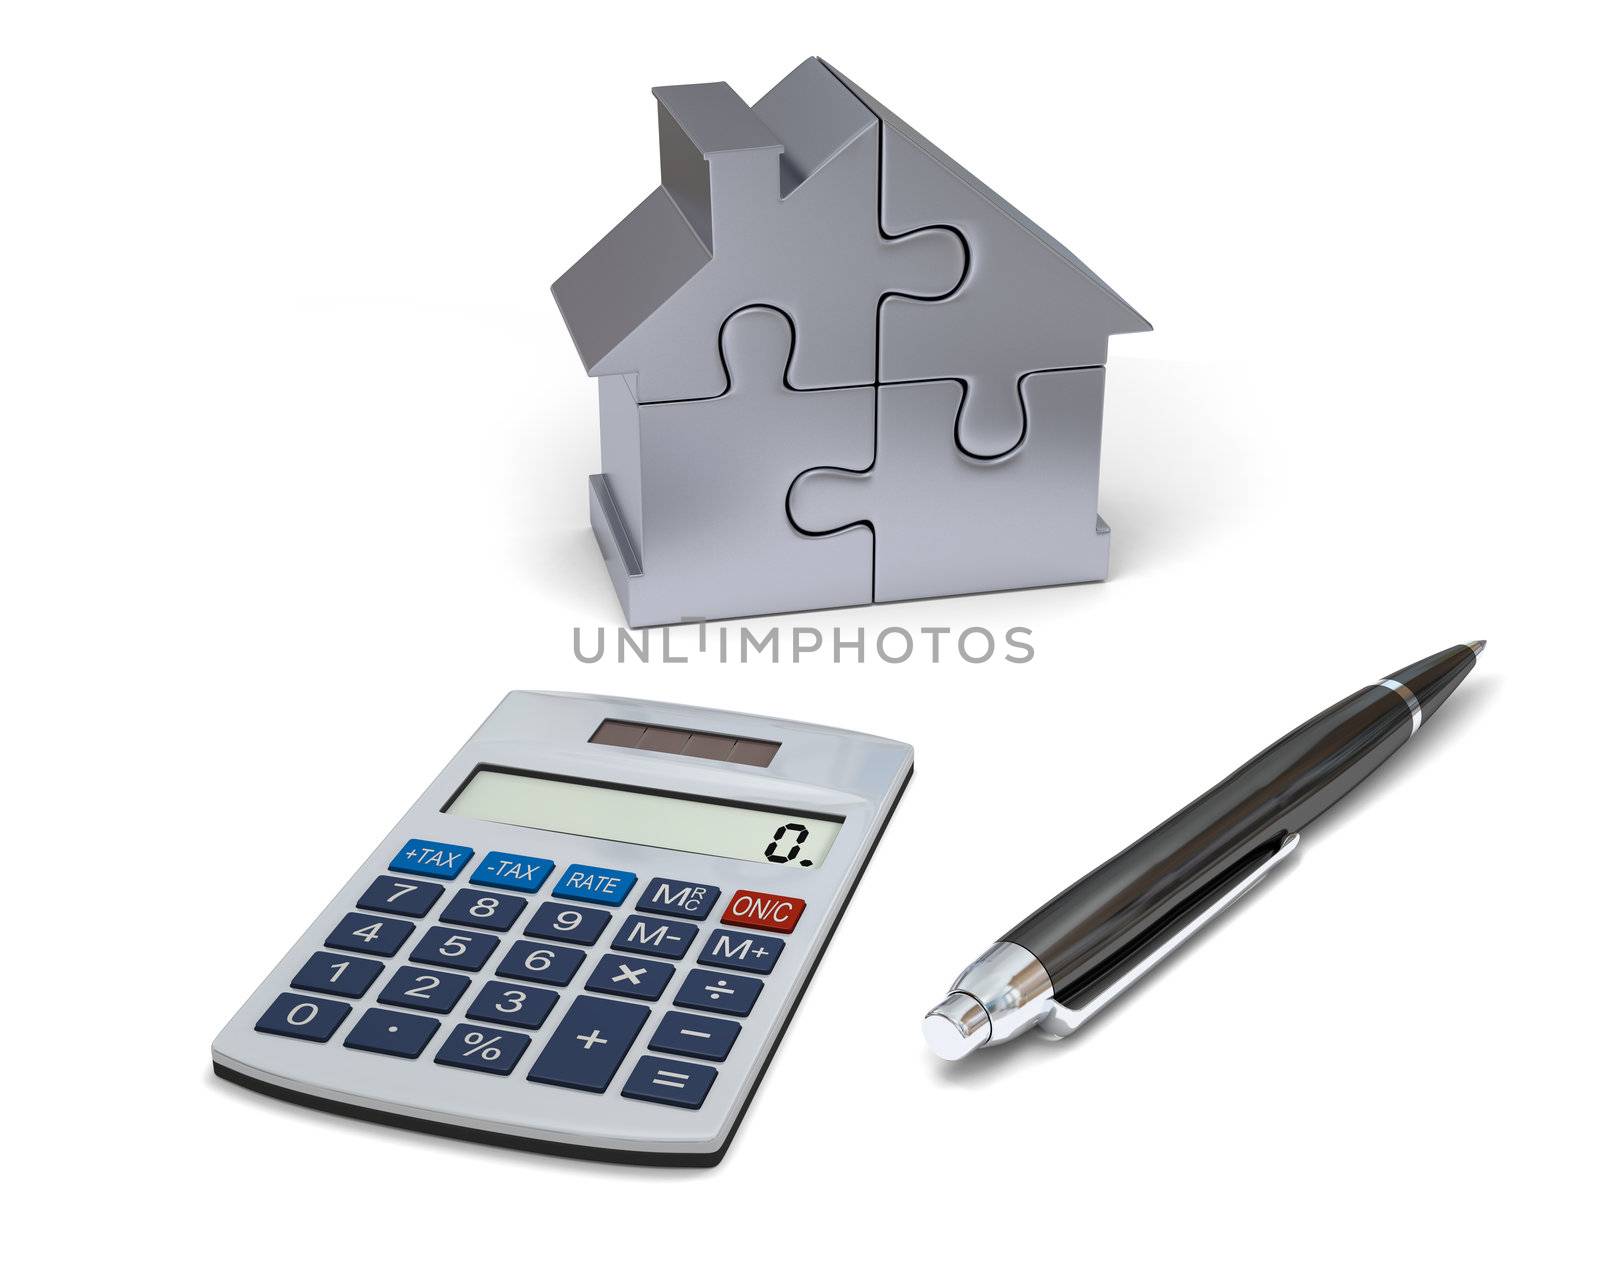 Concept of house financing with calculator, pen and silver model of house made of jigsaw pieces